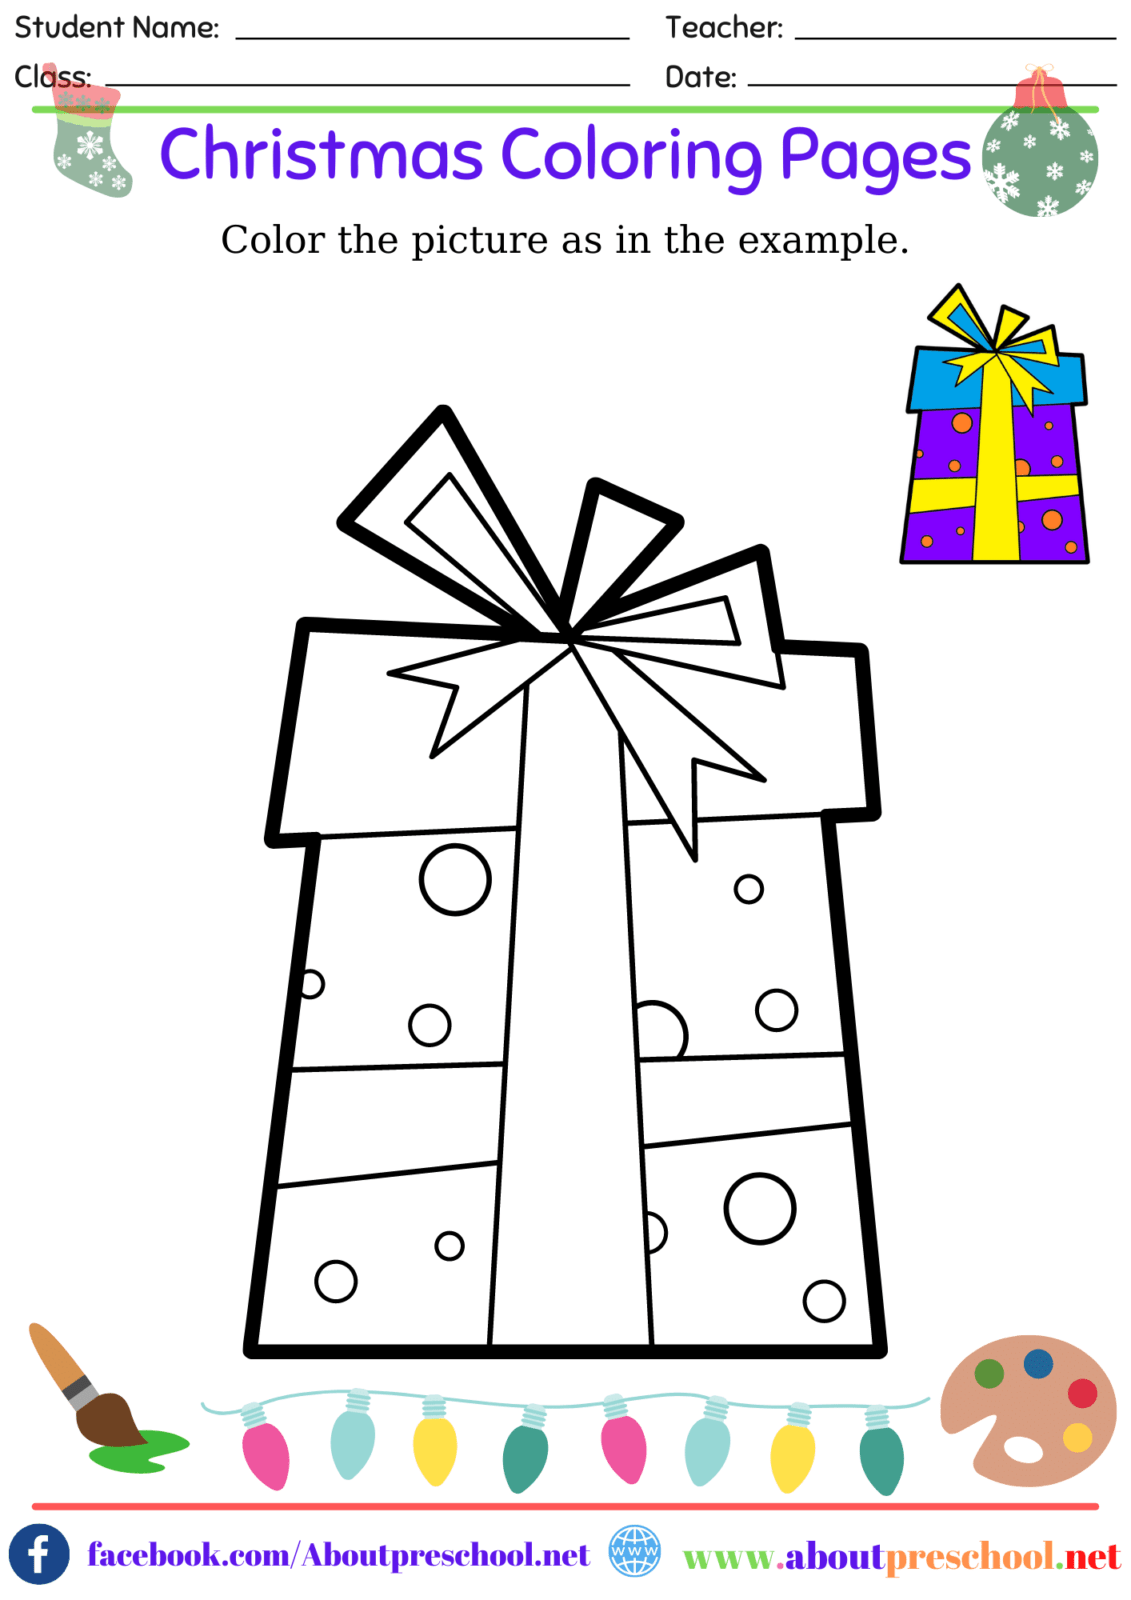 Christmas Coloring Pages 9